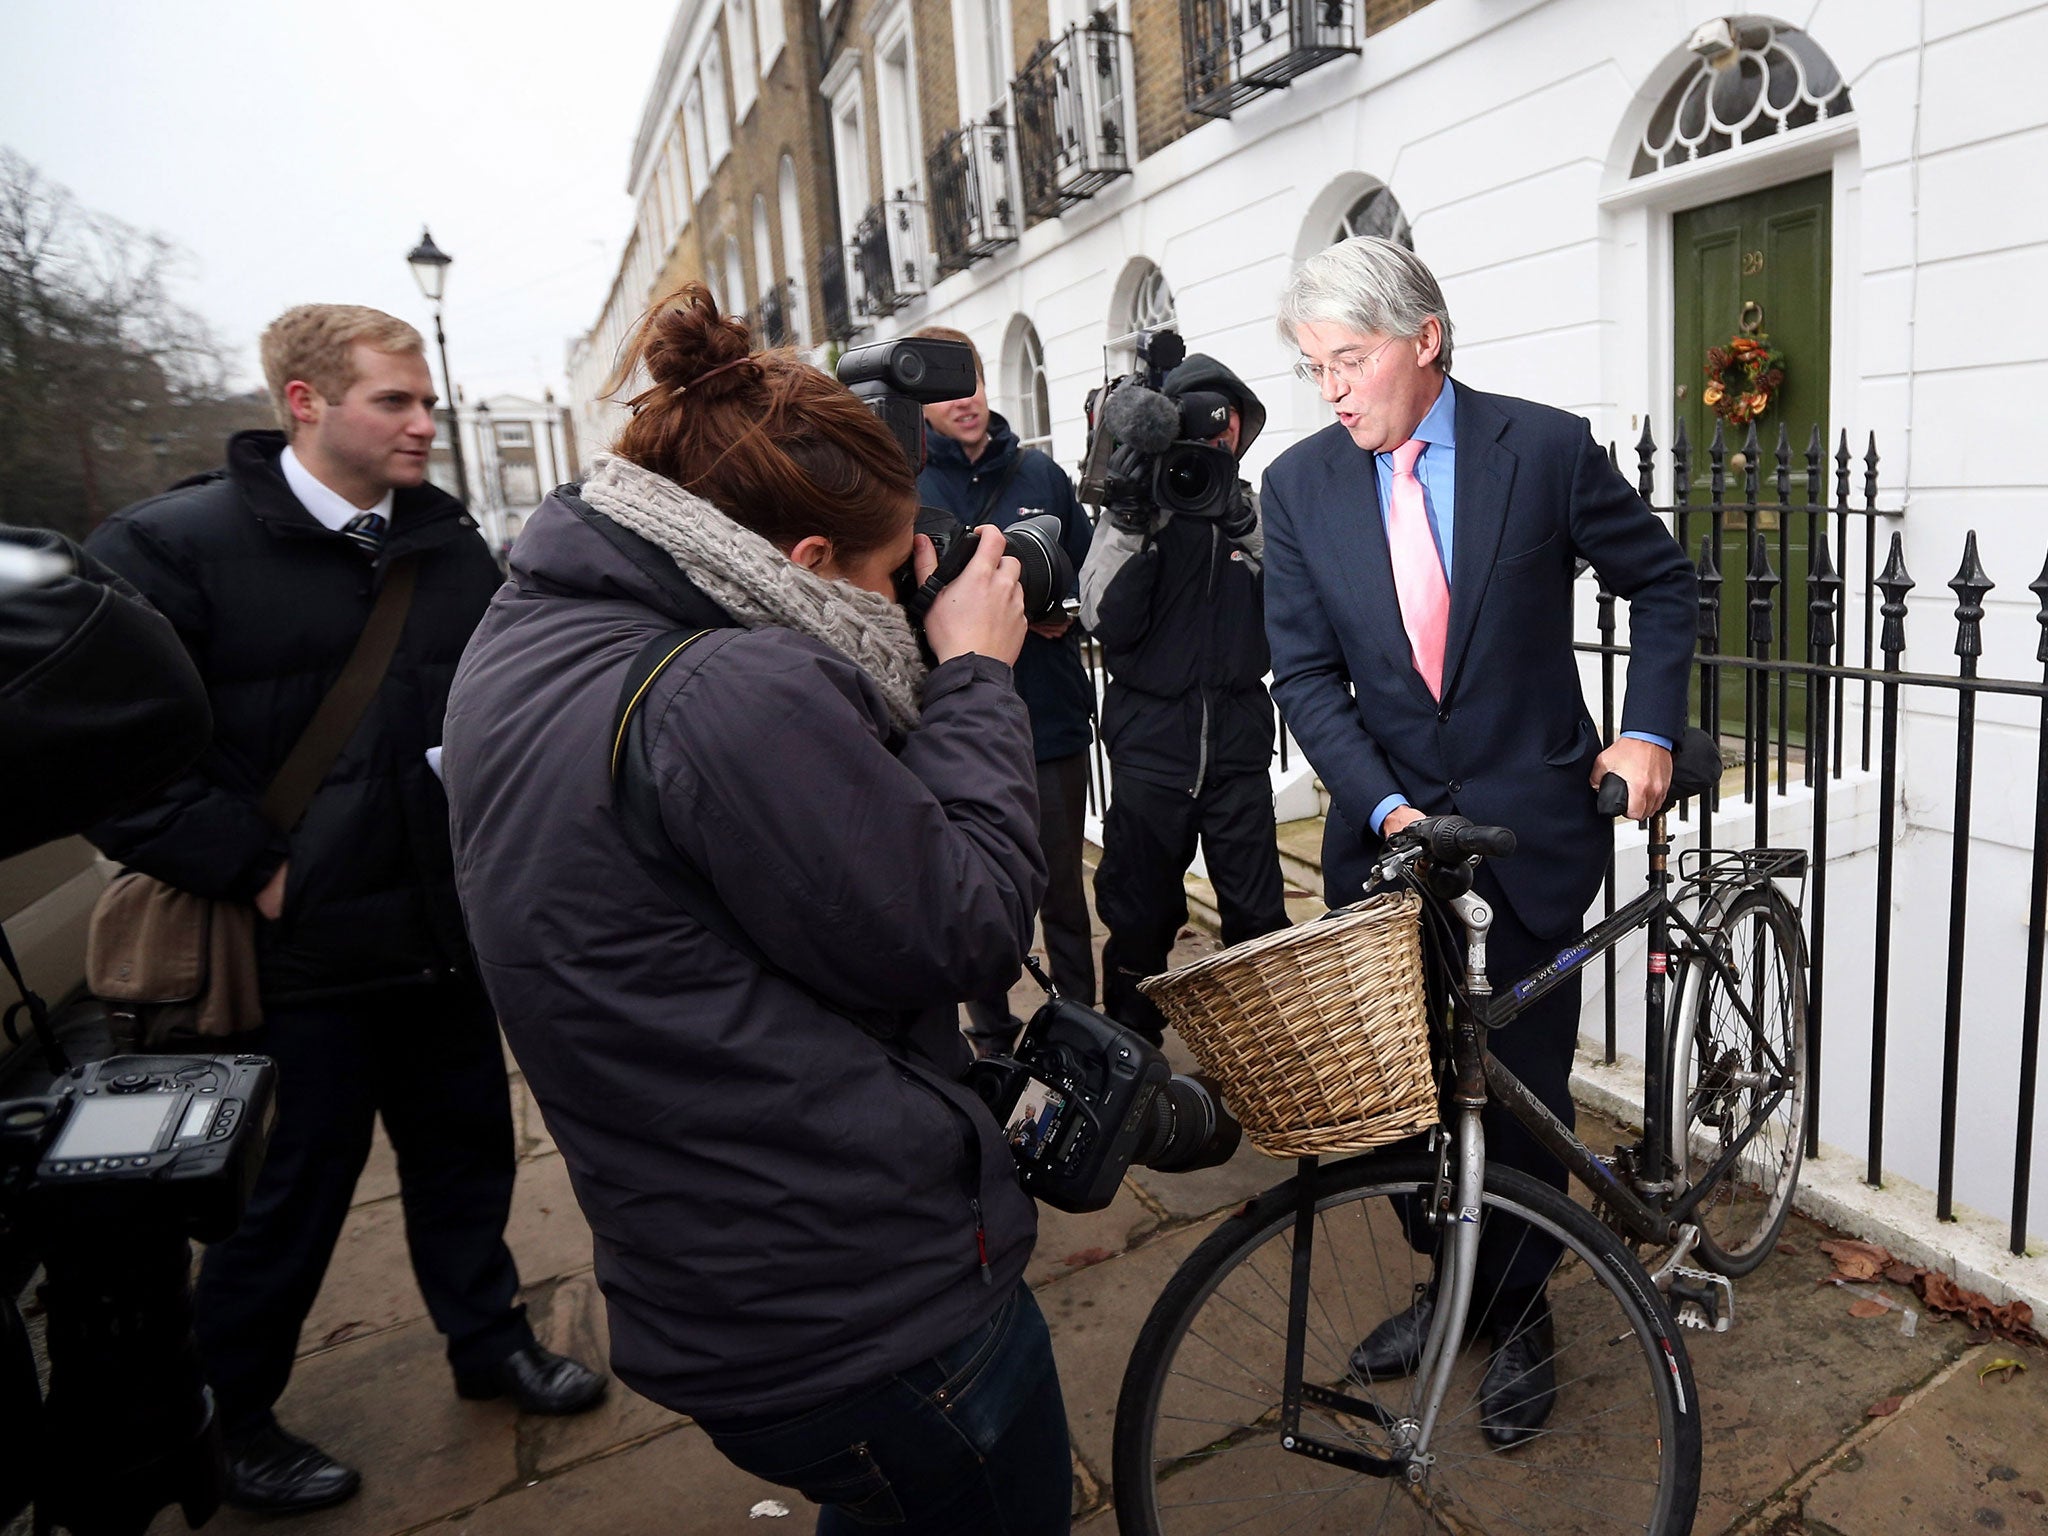 Andrew Mitchell, the former chief whip at the heart of Plebgate, the scandal that stirred a hornet’s nest